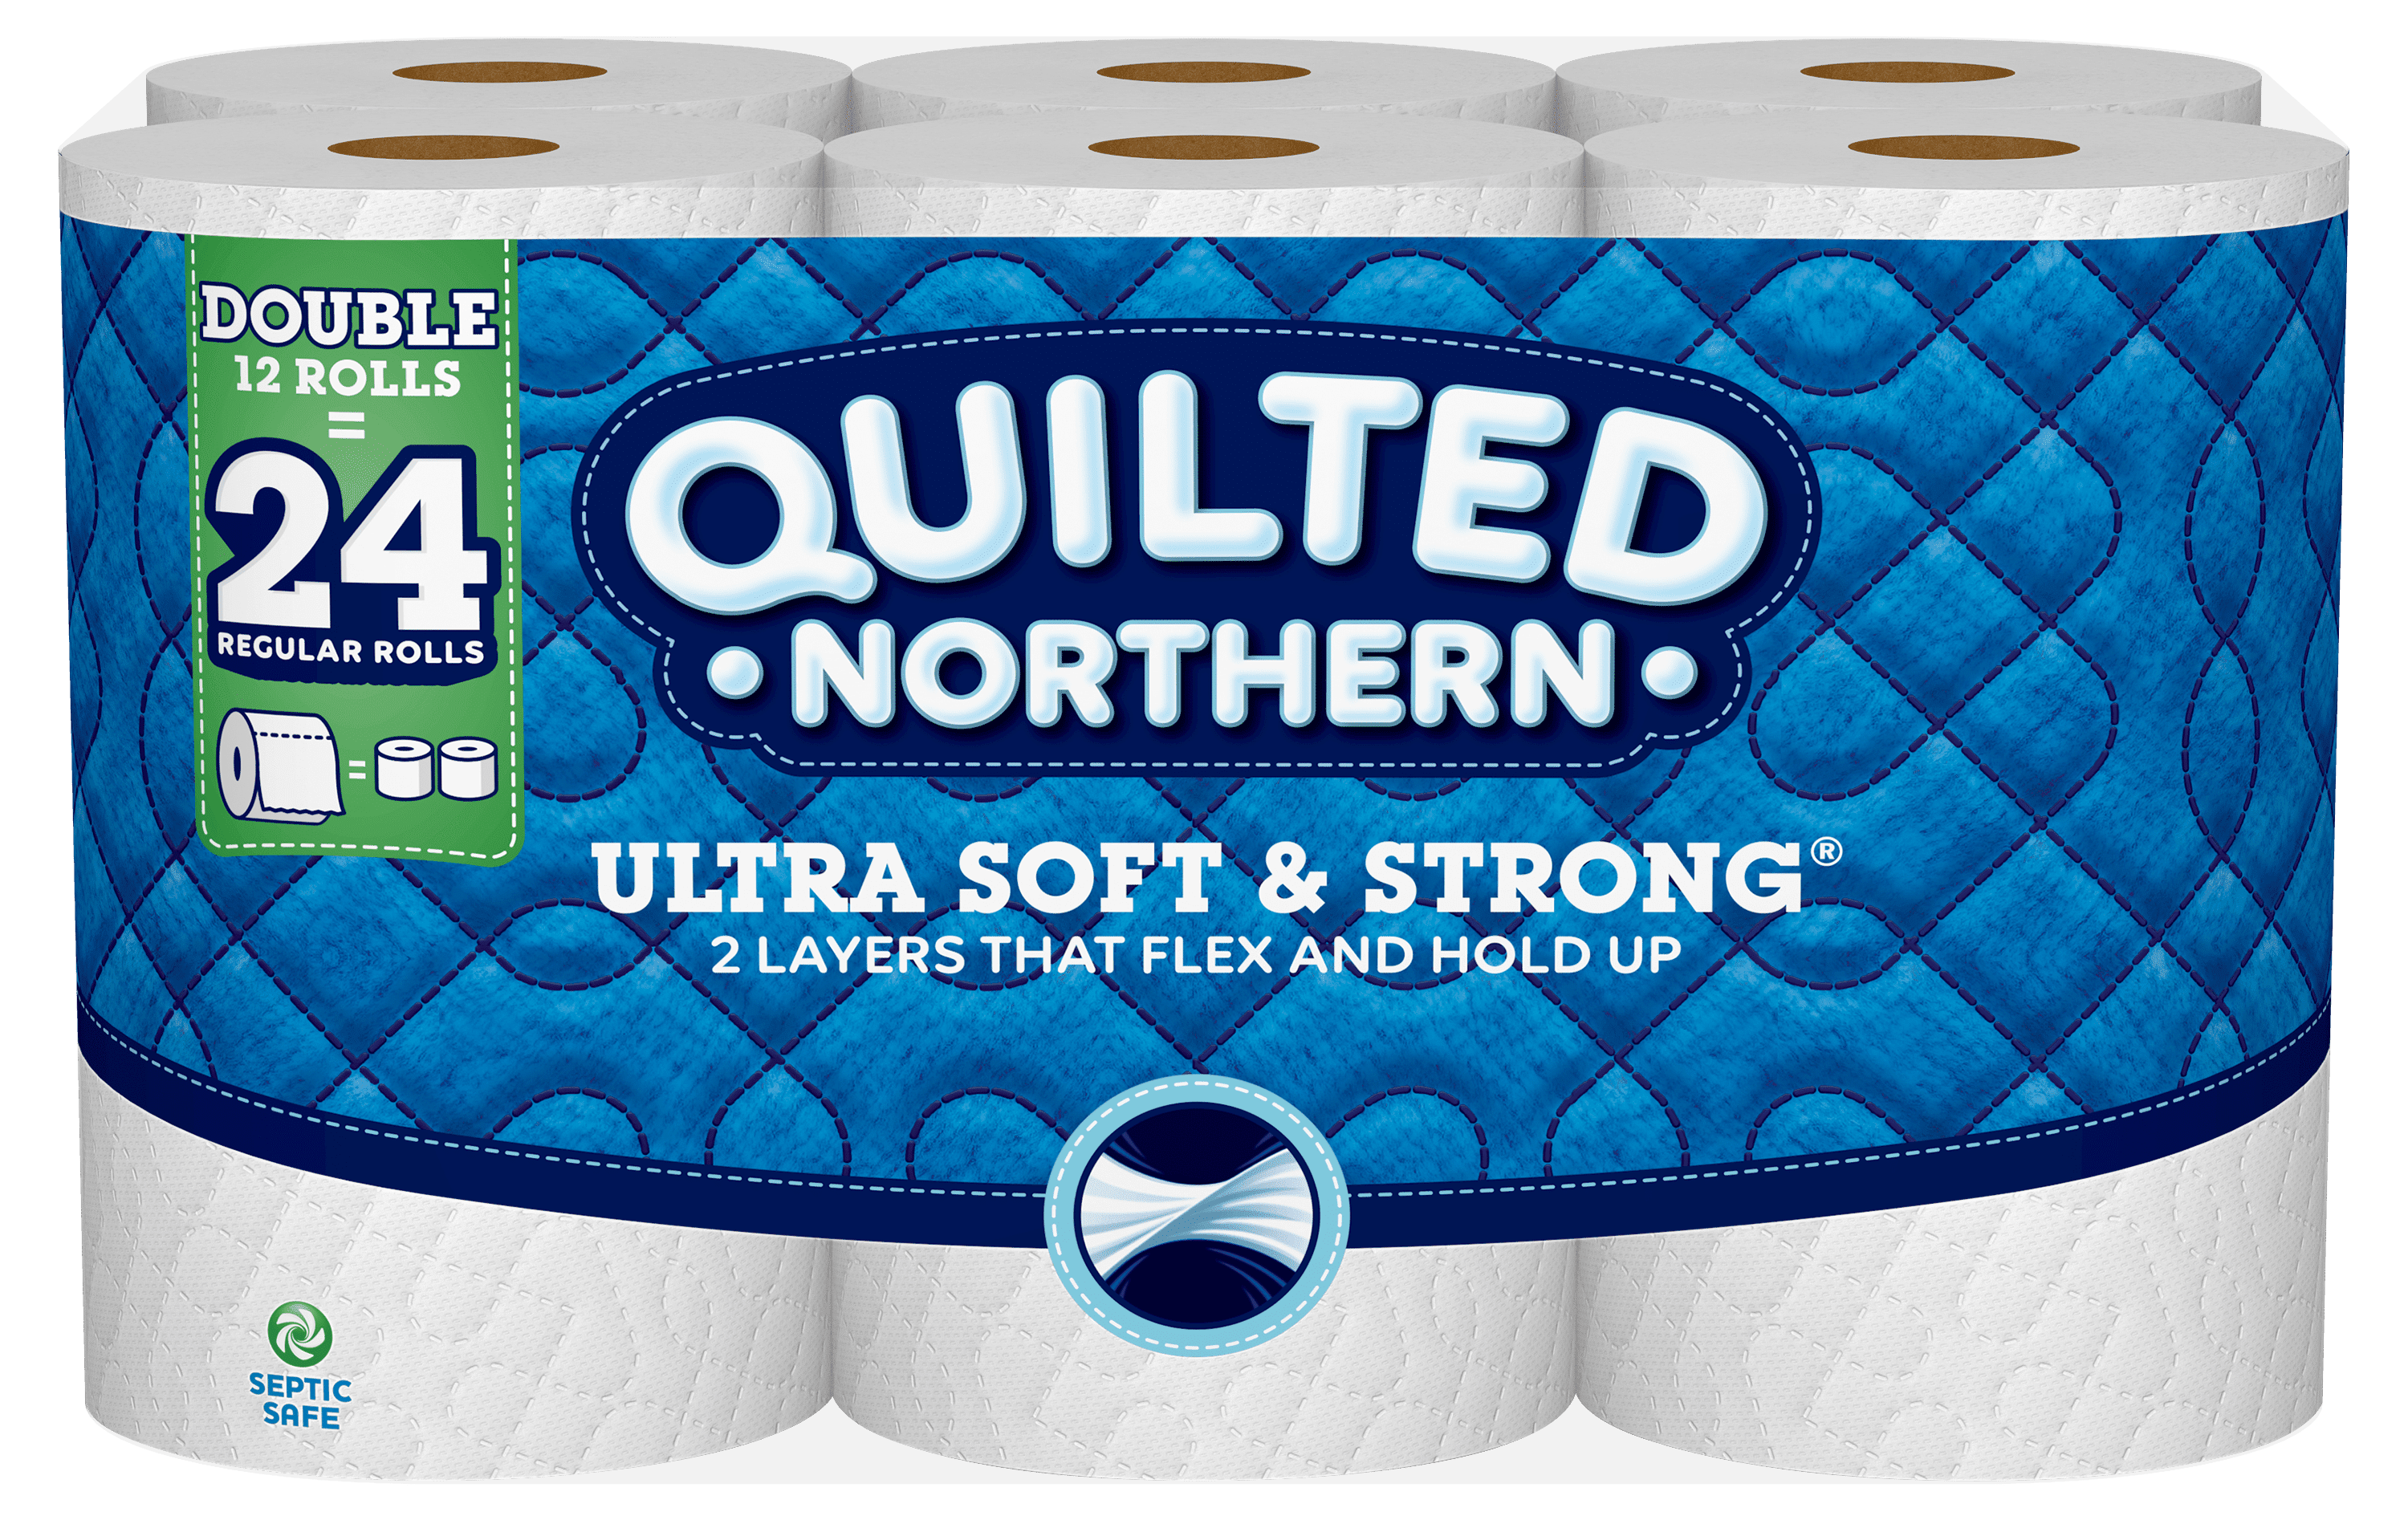 Pack of 48 Double Rolls Quilted Northern Ultra Plush Toilet Paper NEW STOCK 